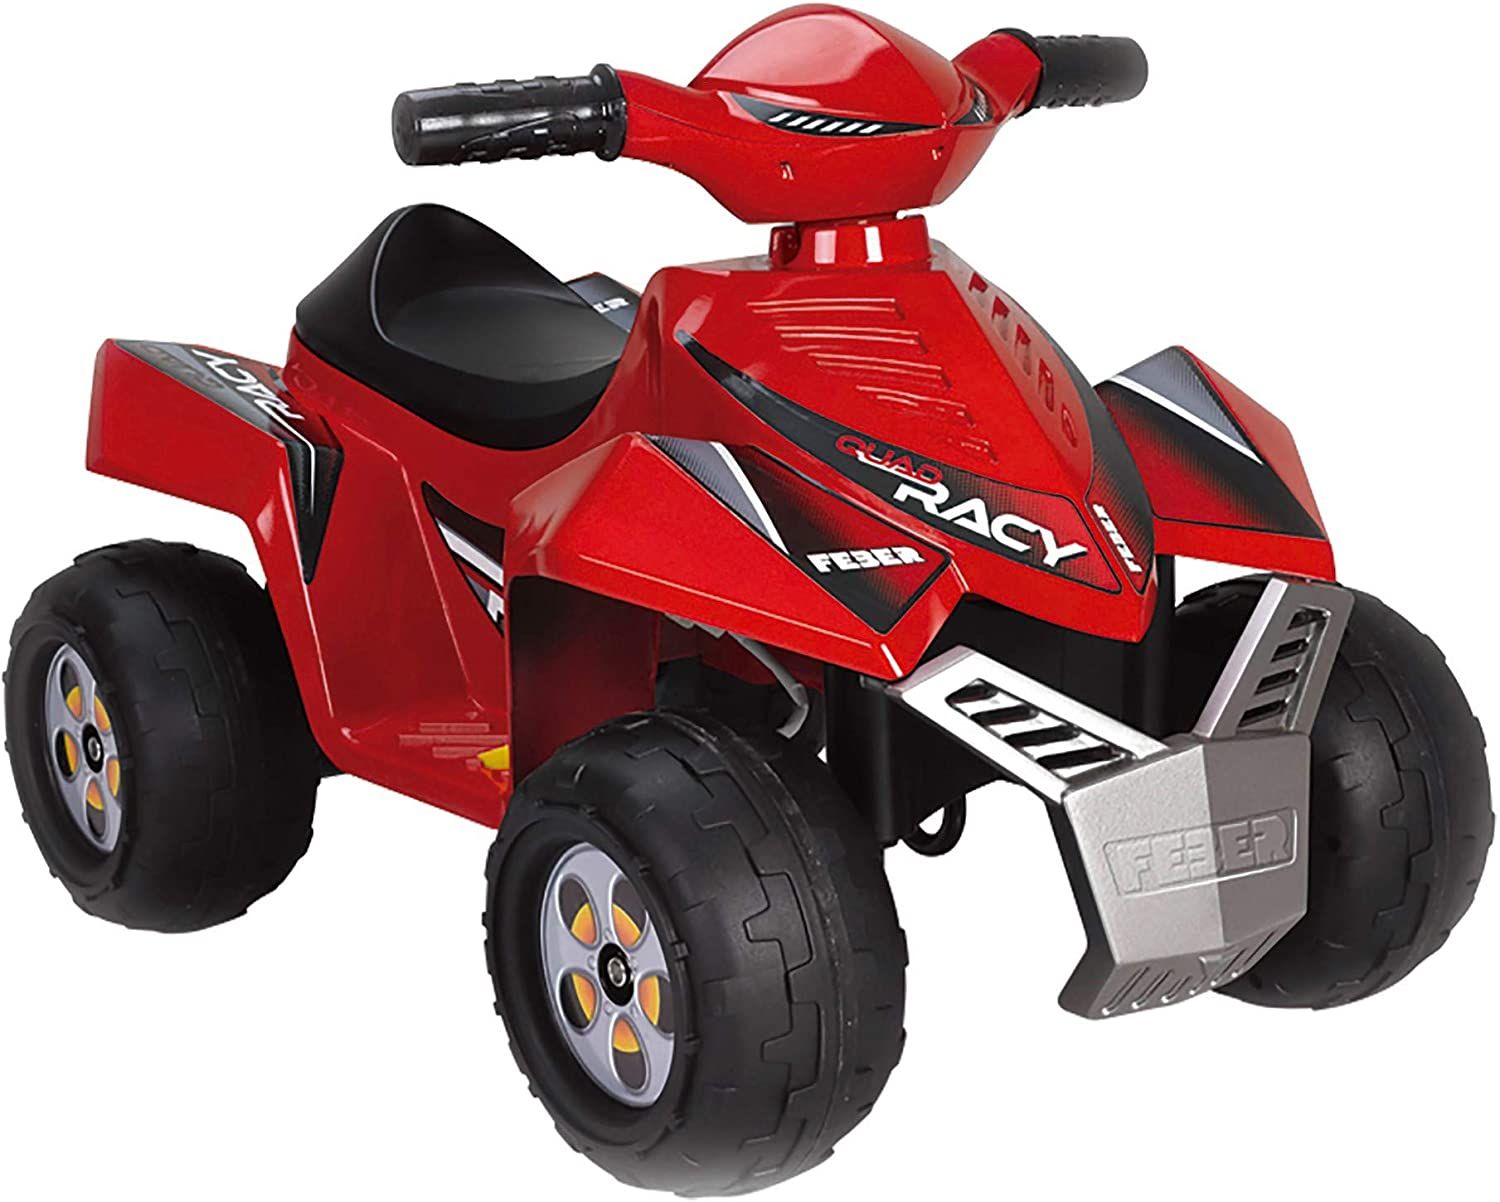 Null Electric Quad FEBER Racy 6V red- Famosa 800011252 - 1/3 years - sold new wi&hellip;